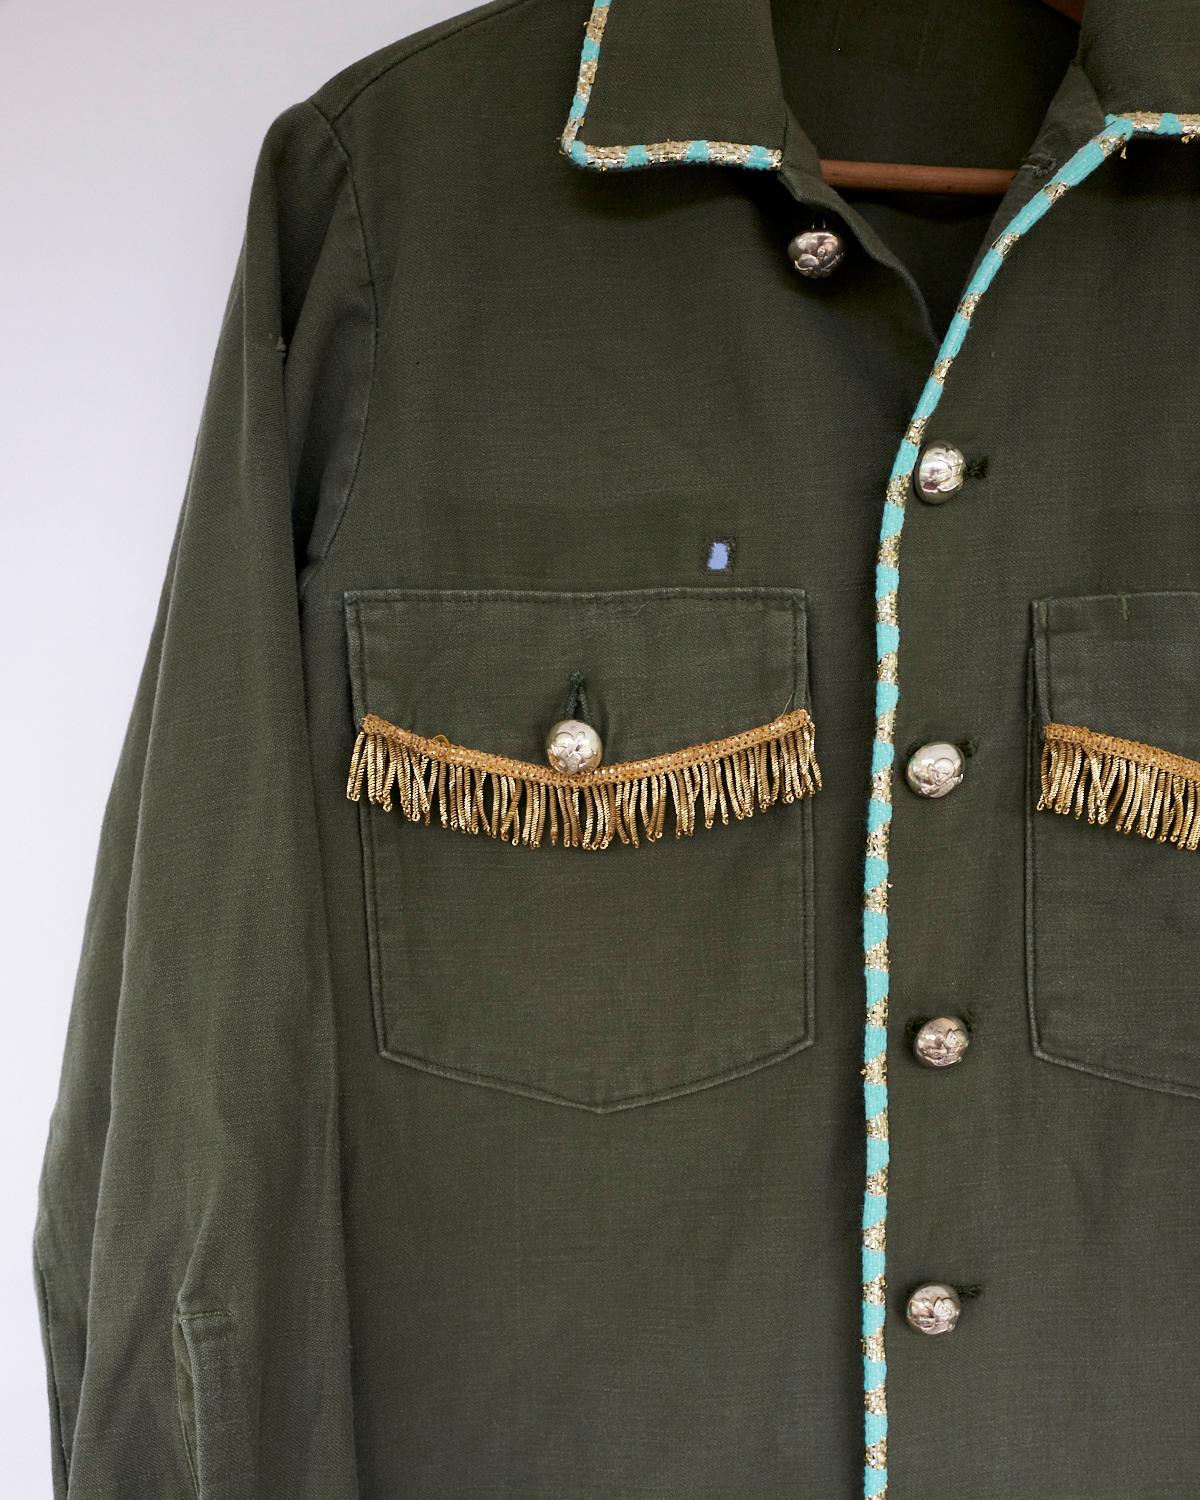 Women's Fringe Embellished Jacket Cropped Tweed Military Green Gold Buttons J Dauphin